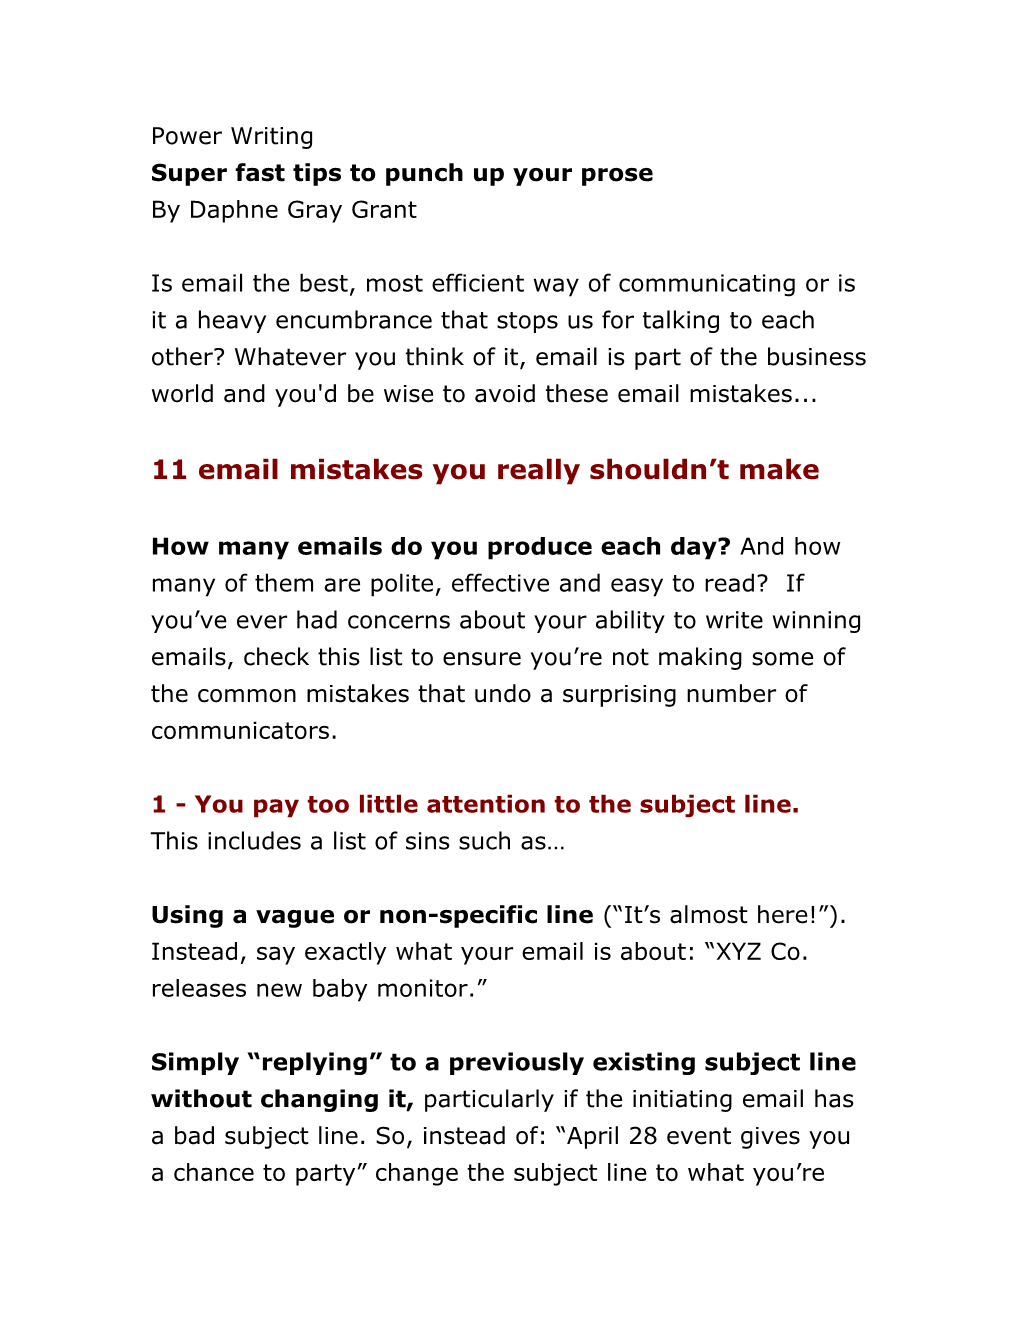 Super Fast Tips to Punch up Your Prose